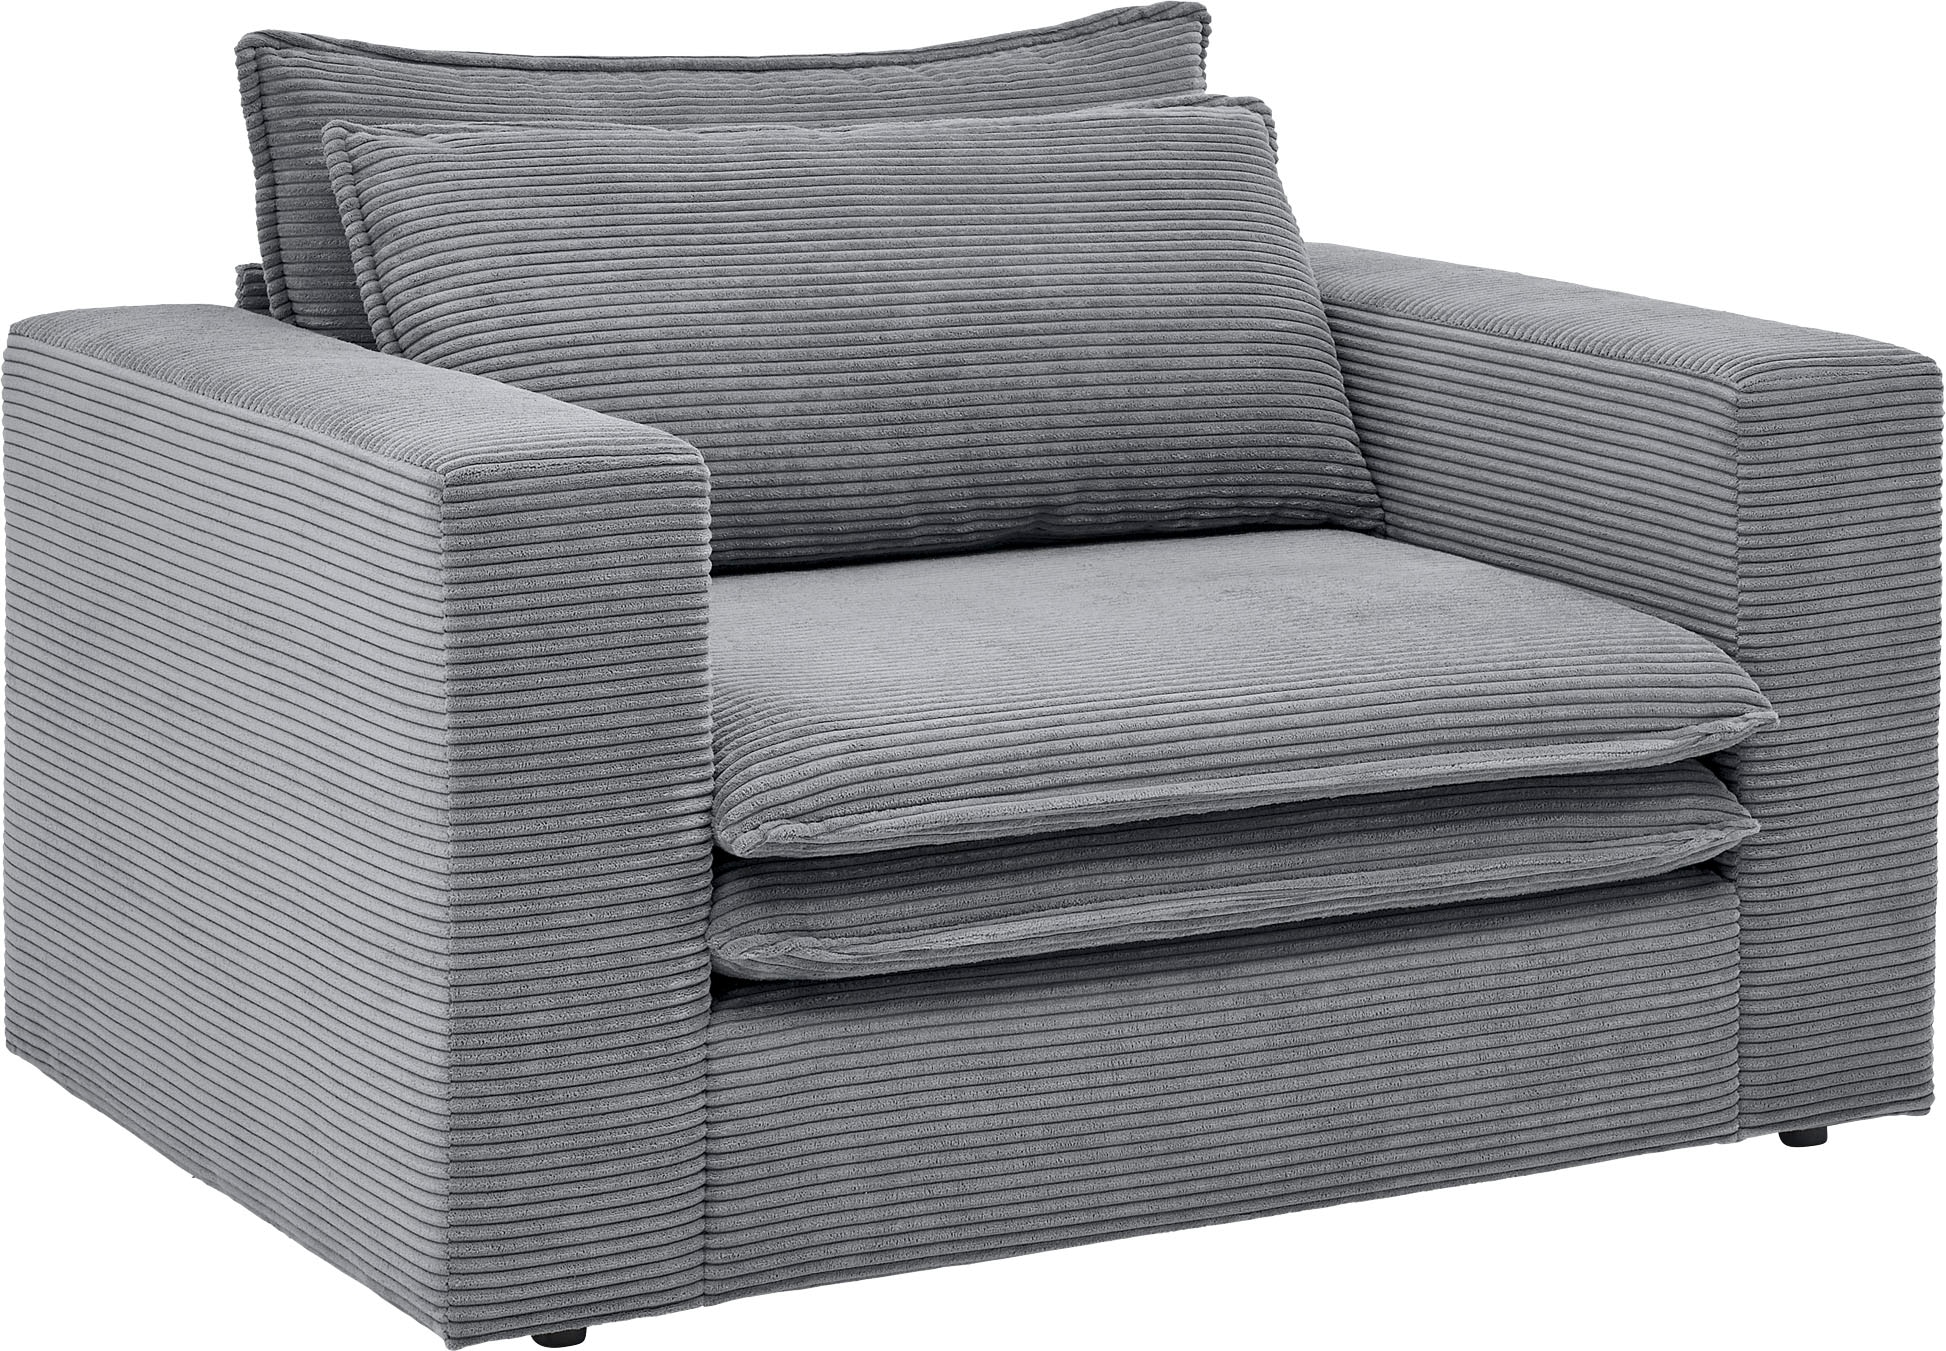 Places of Style Loveseat »PIAGGE«, Cord, bei Loveseat trendiger OTTO Hochwertiger